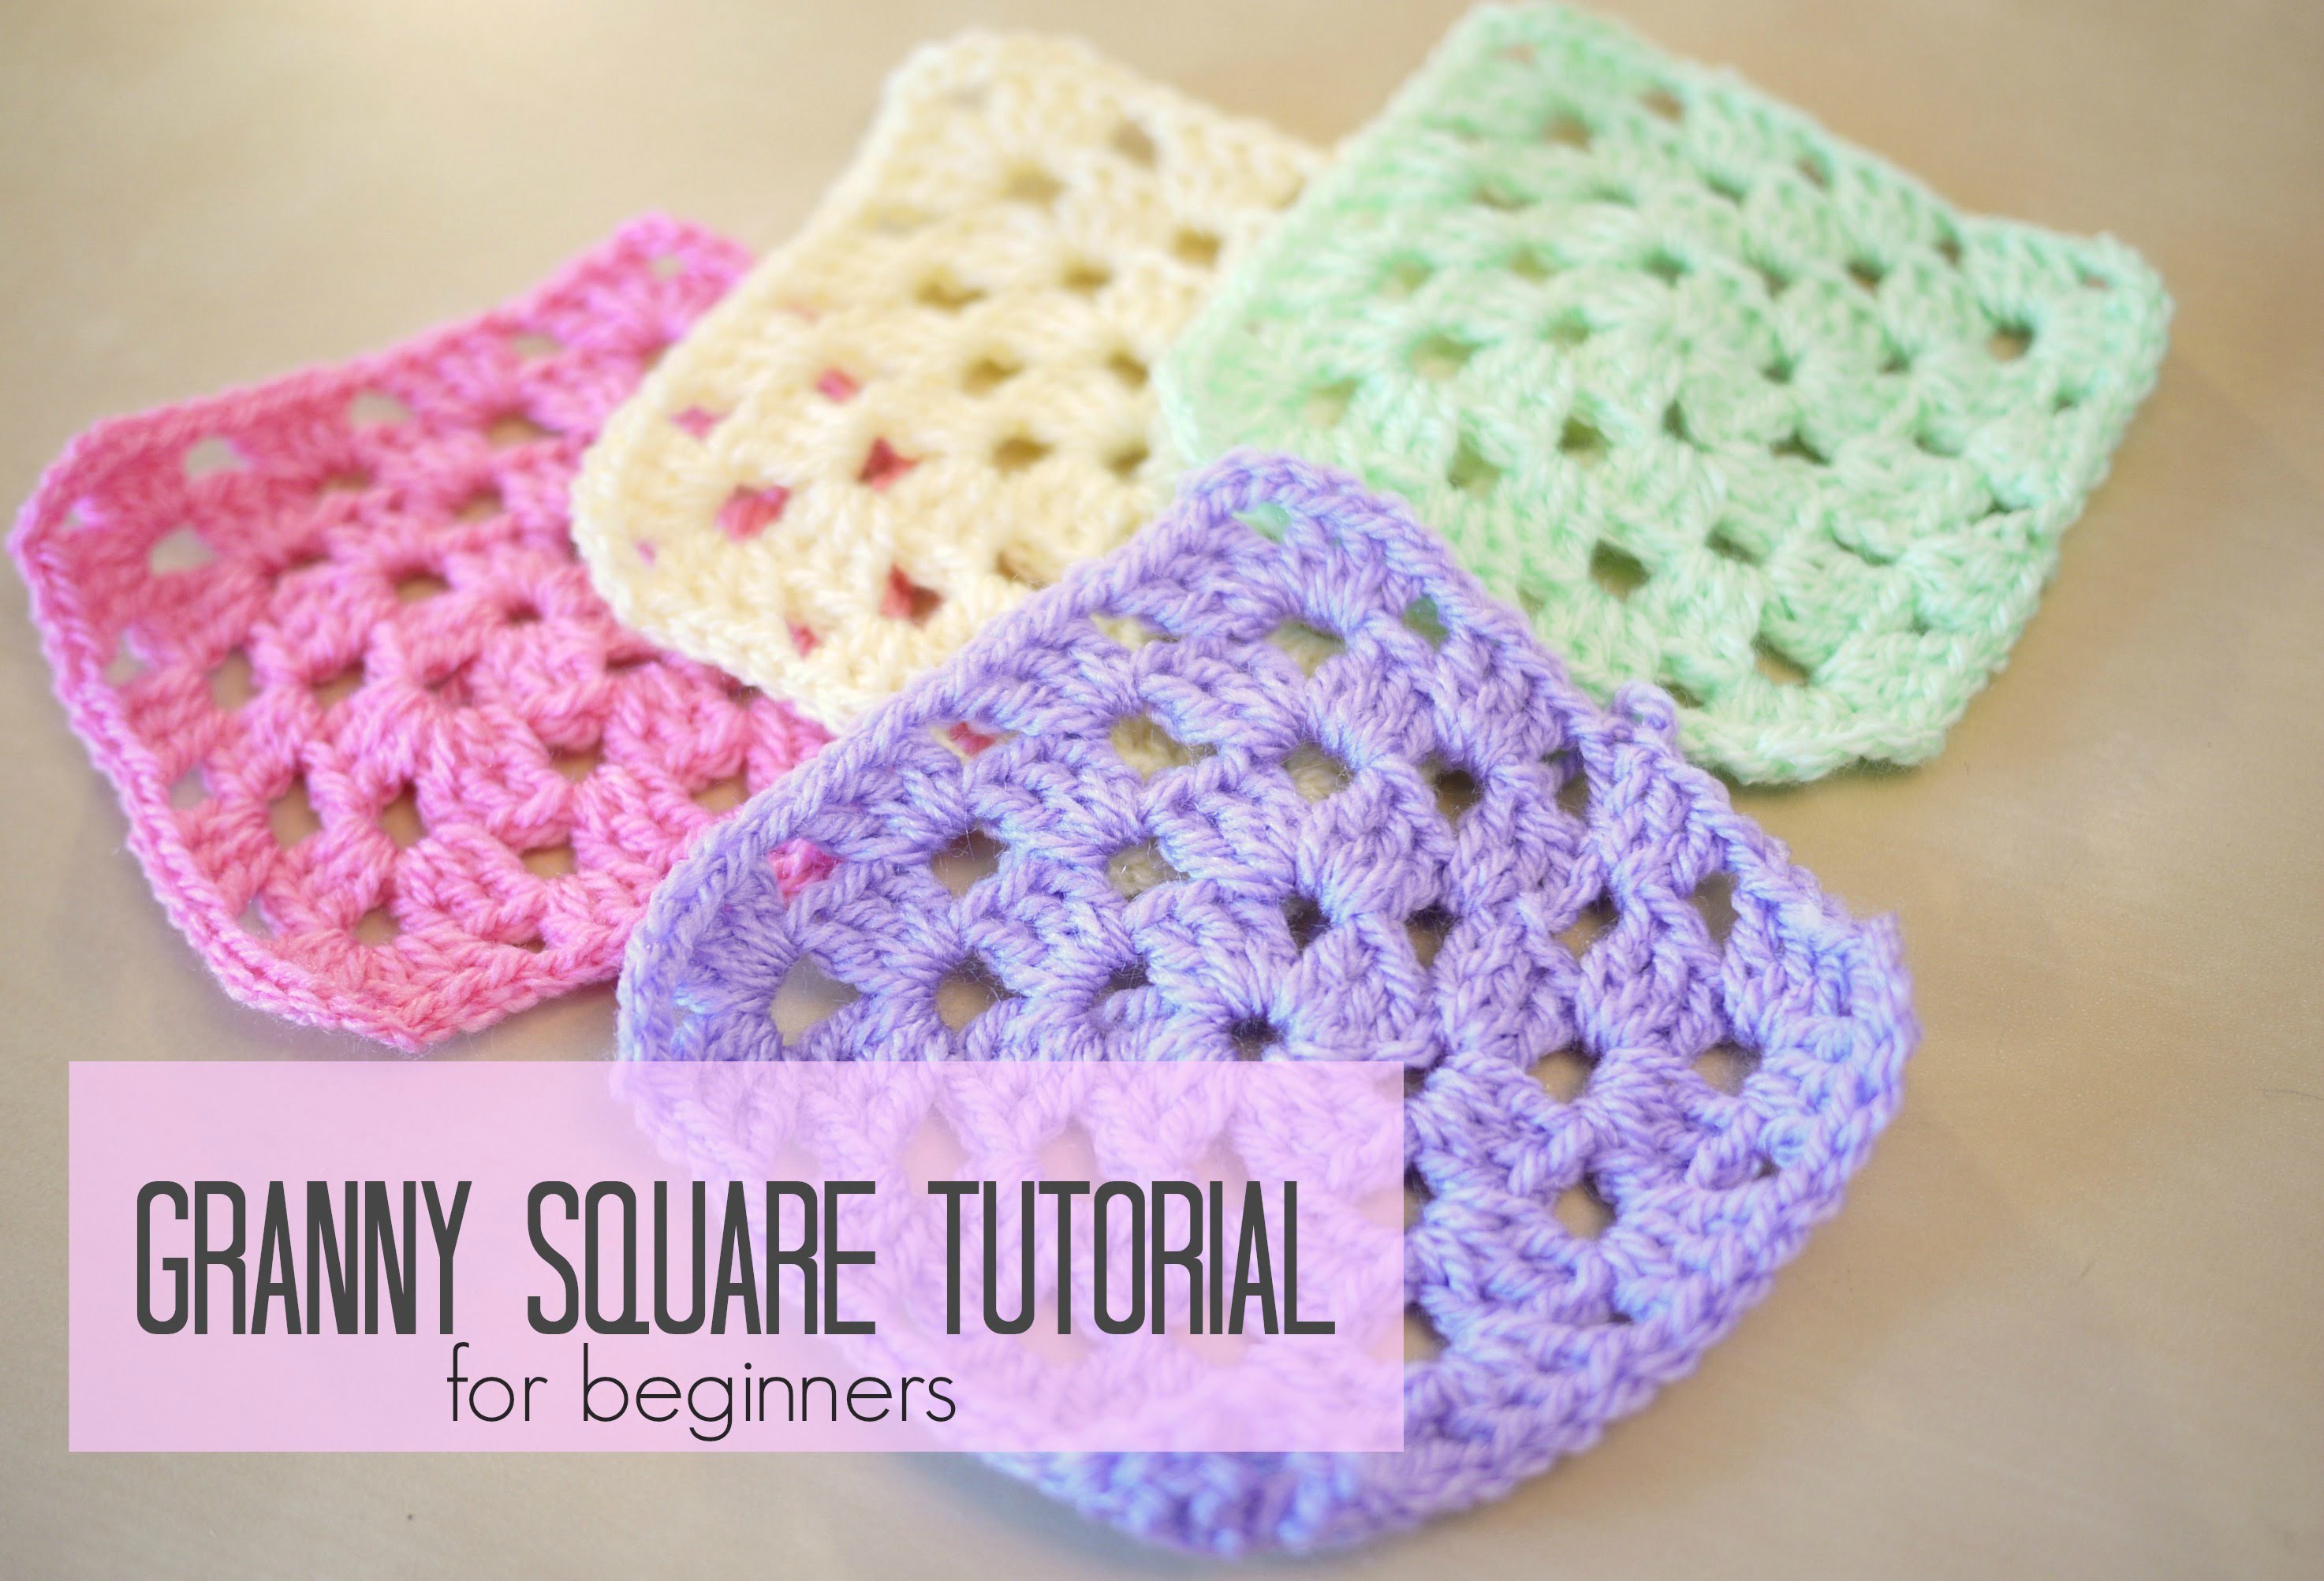 CROCHET: How to crochet a granny square for beginners | Bella Coco